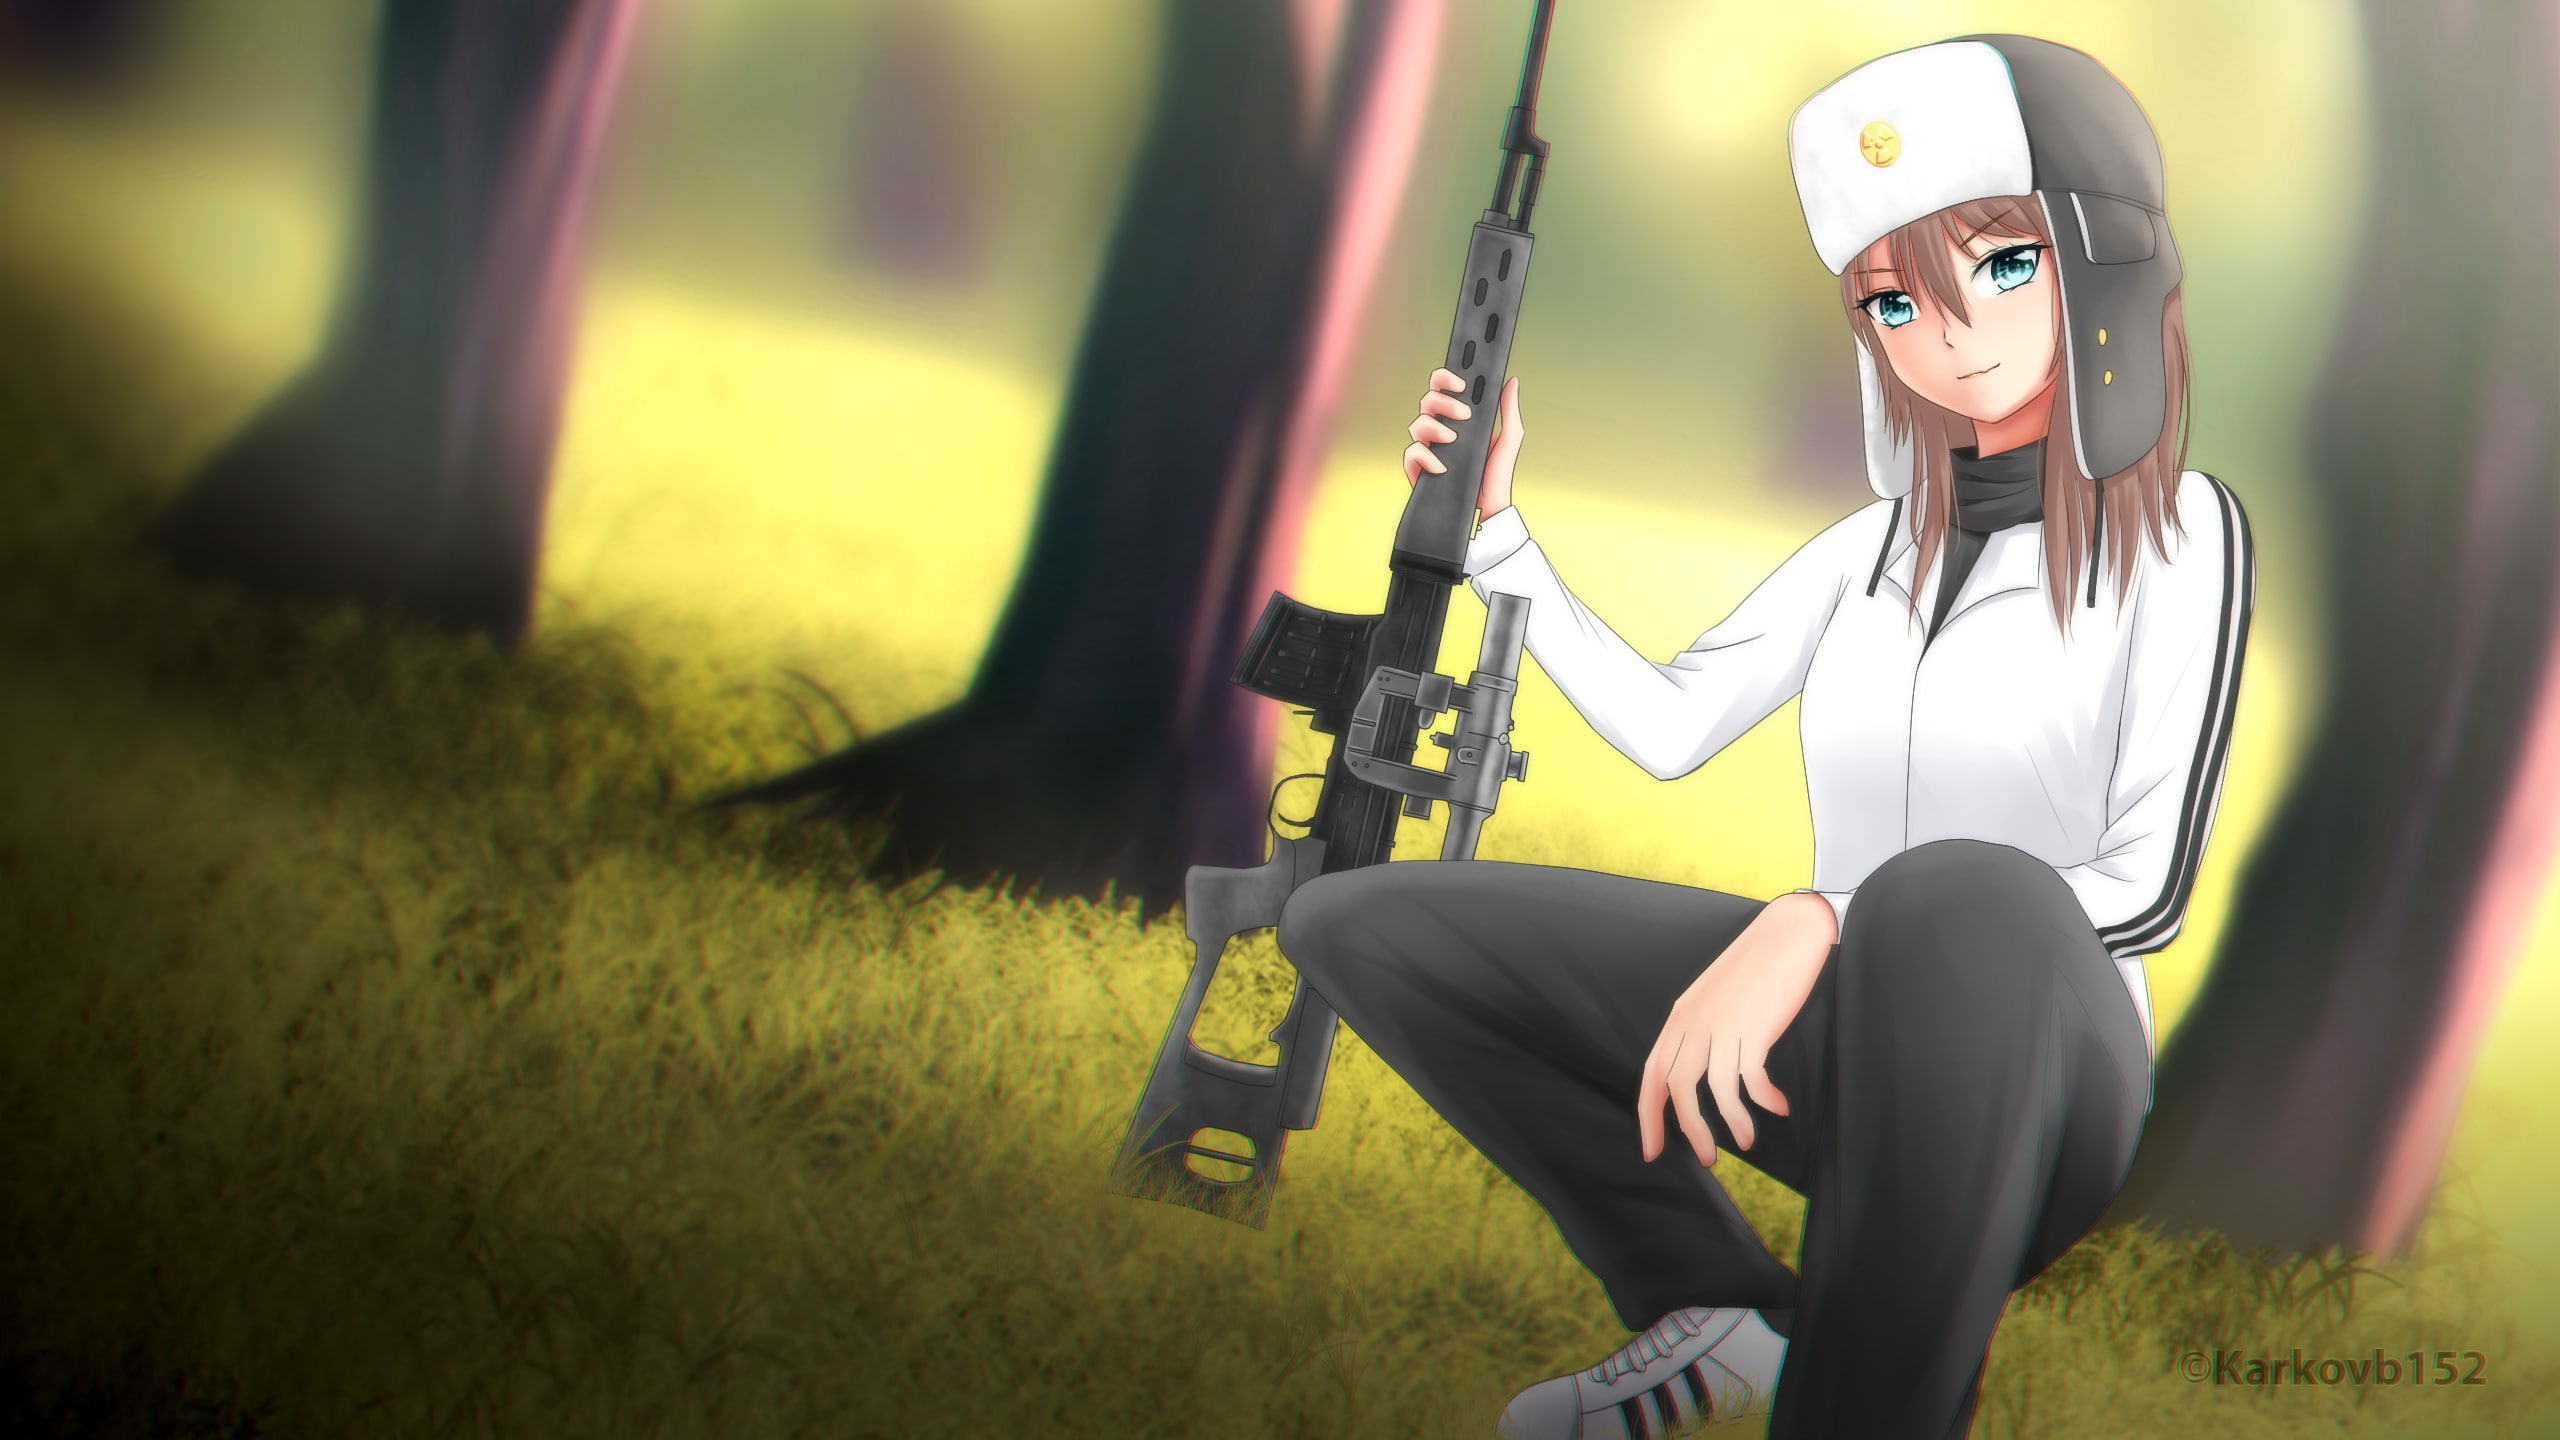 anime, Russian, Dragunov sniper rifle, weapon, forest, anime girls